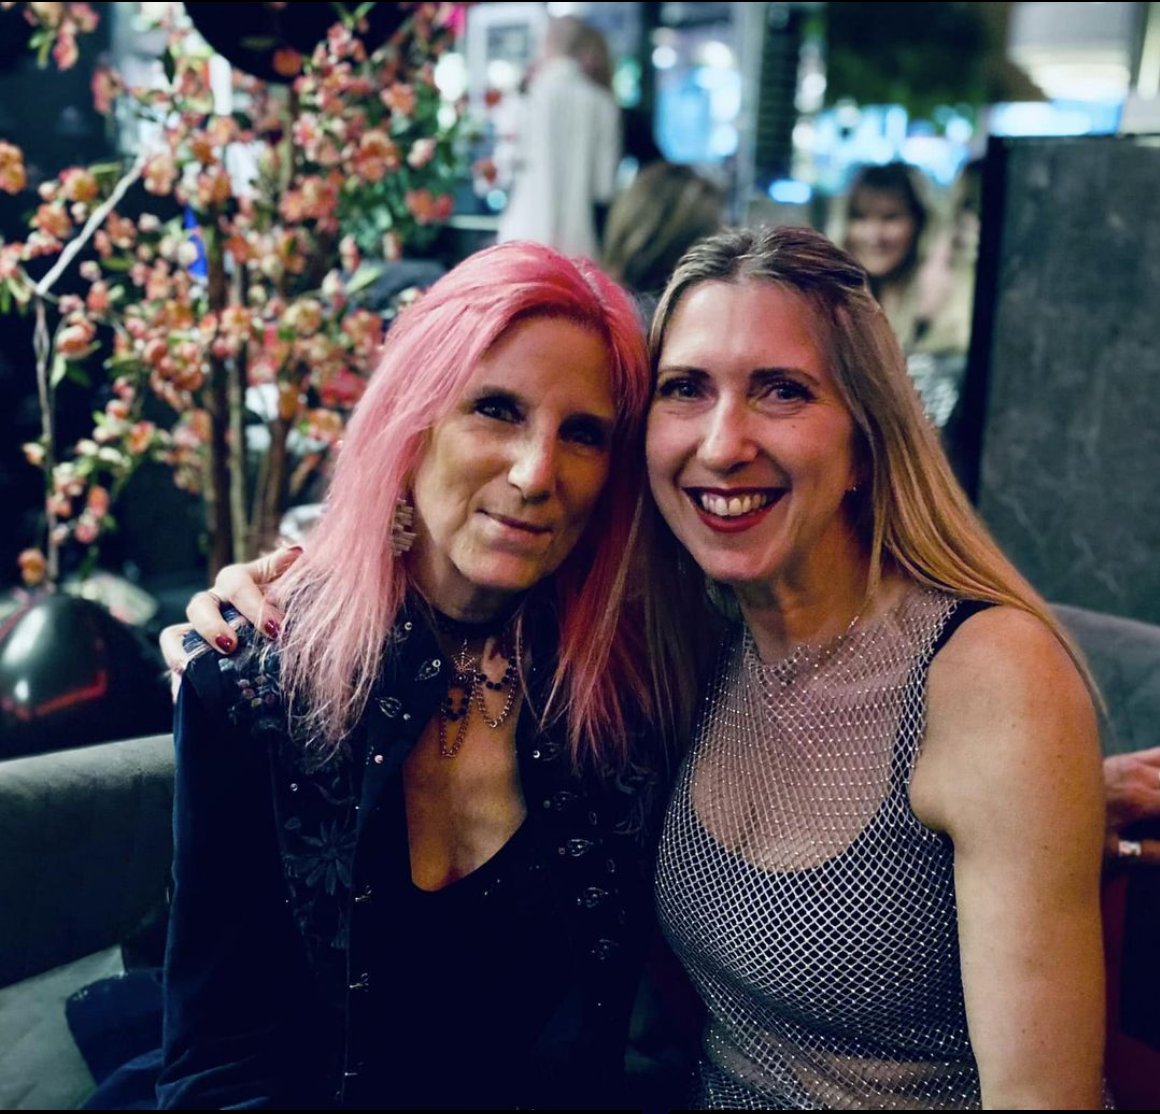 Big congrats to @wild1media - a year old and kicking some serious ass! The celebration on Wednesday at @karmasanctumldn was epic. So honoured to be amongst so many legendary Women Who Rock.